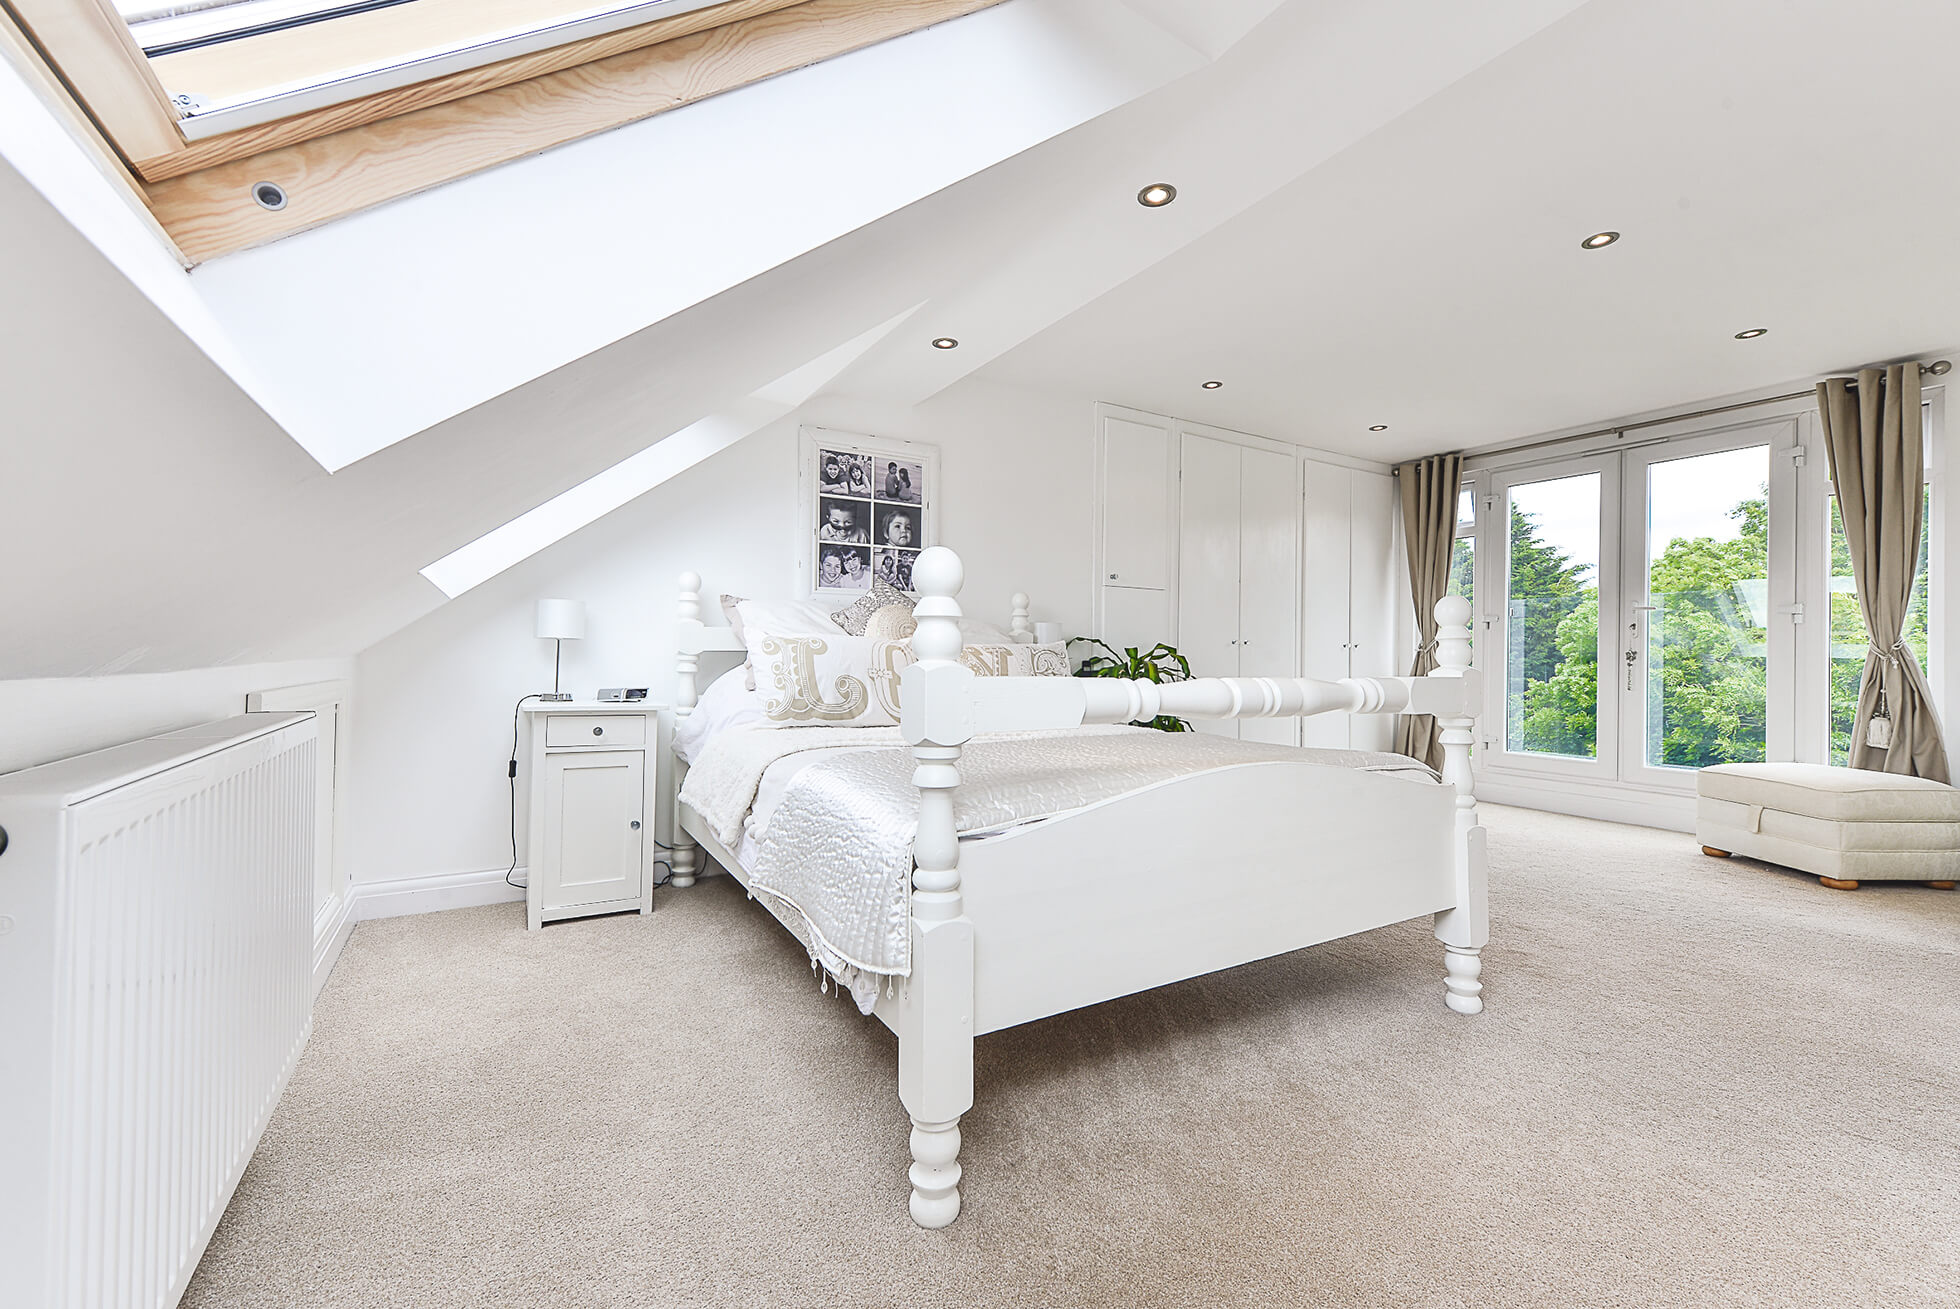 Do you have a question about converting your Loft in Leavesden? Here are the most popular questions asked by our clients.